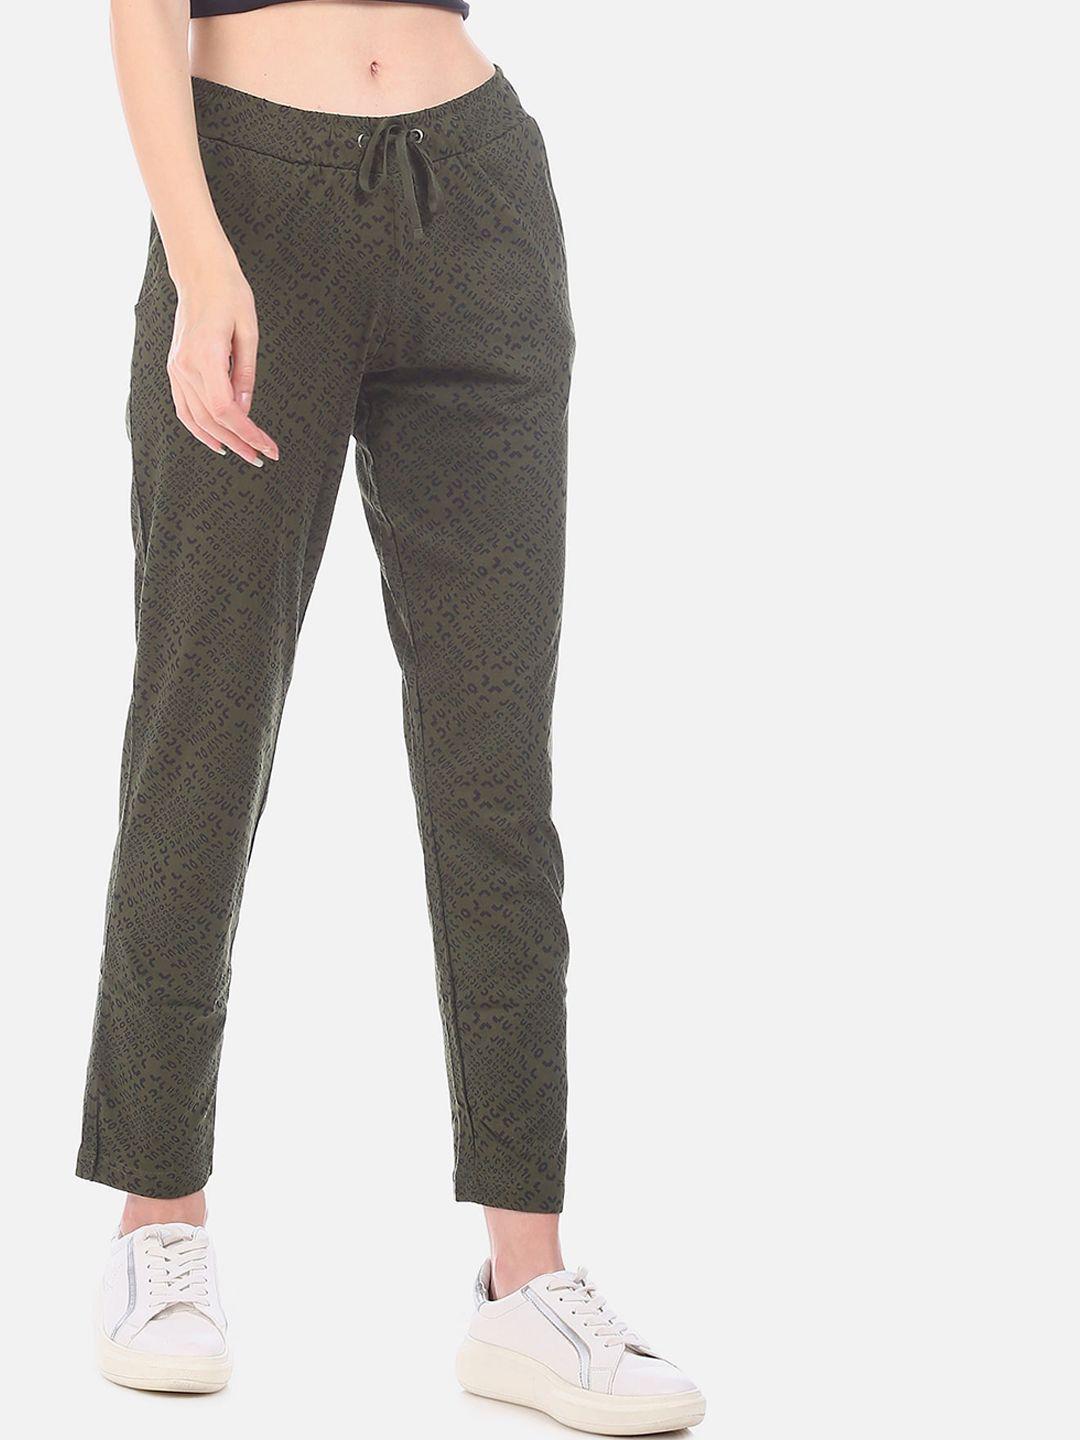 sugr-women-olive-green-&-black-printed-straight-fit-cropped-track-pants